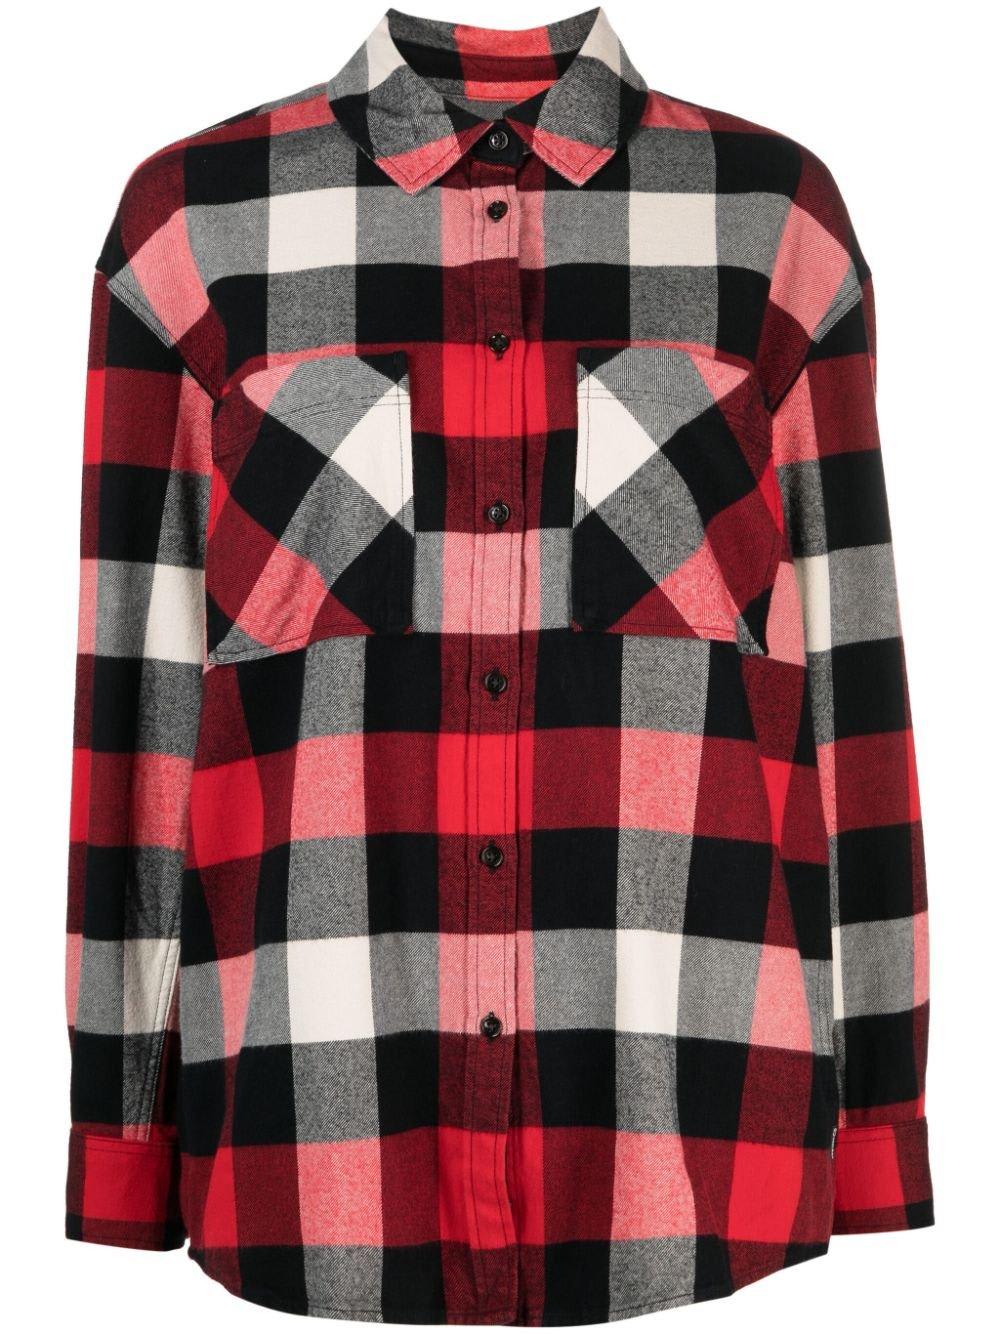 WOOLRICH ALL-OVER PATTERNED BUTTON UP SHIRT